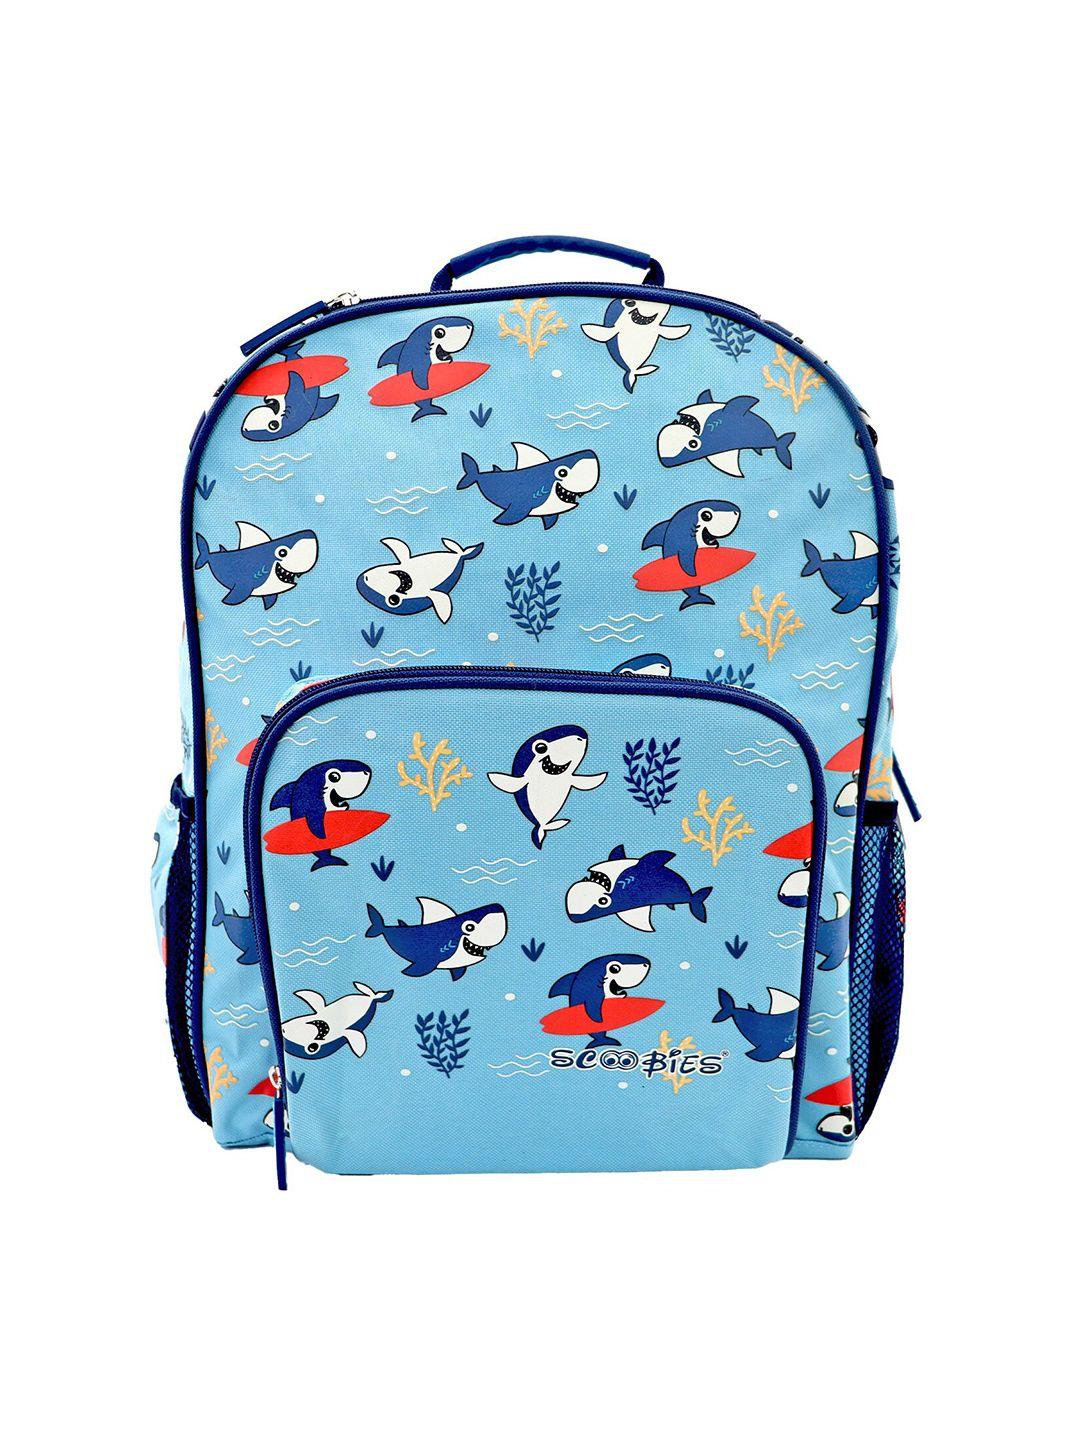 scoobies boys blue & white graphic printed backpack